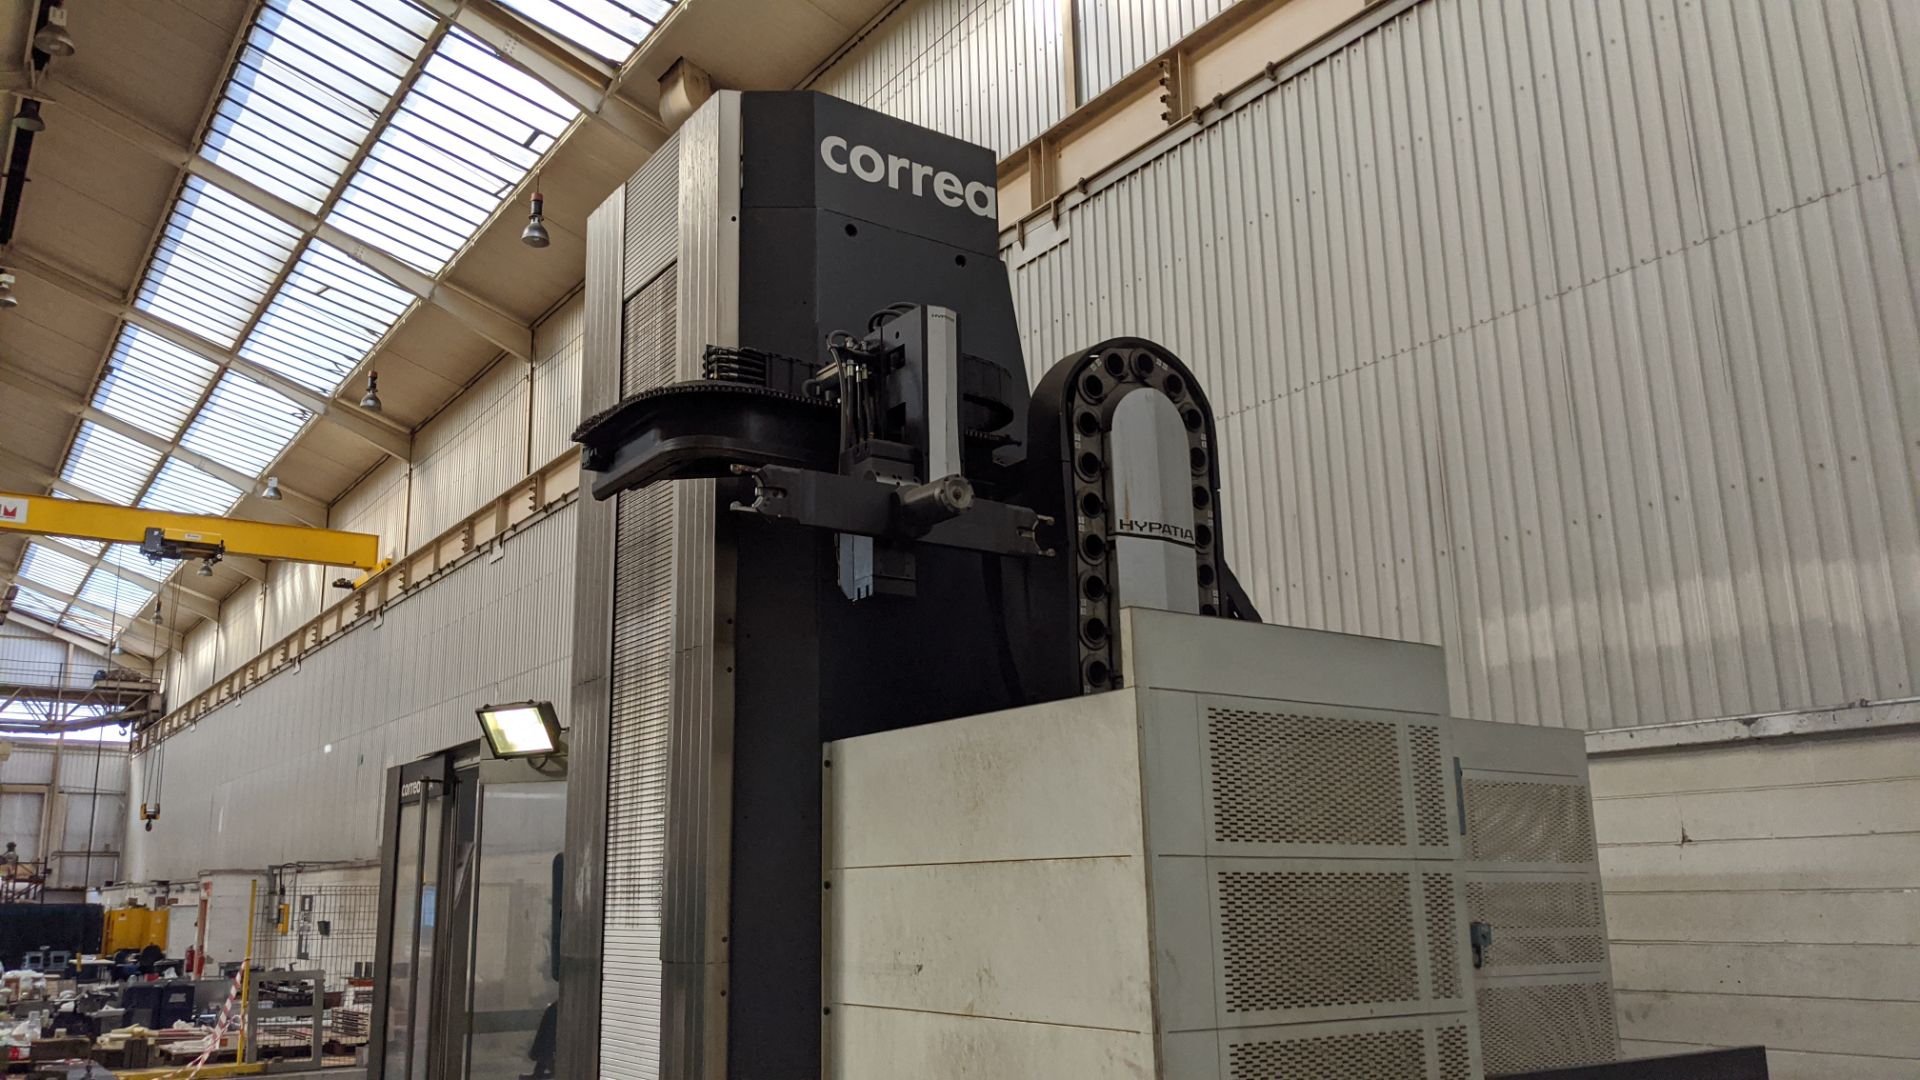 2011 Correa Axia moving column milling machine, serial no. 785075. Total machine weight 62 tonne. - Image 27 of 47